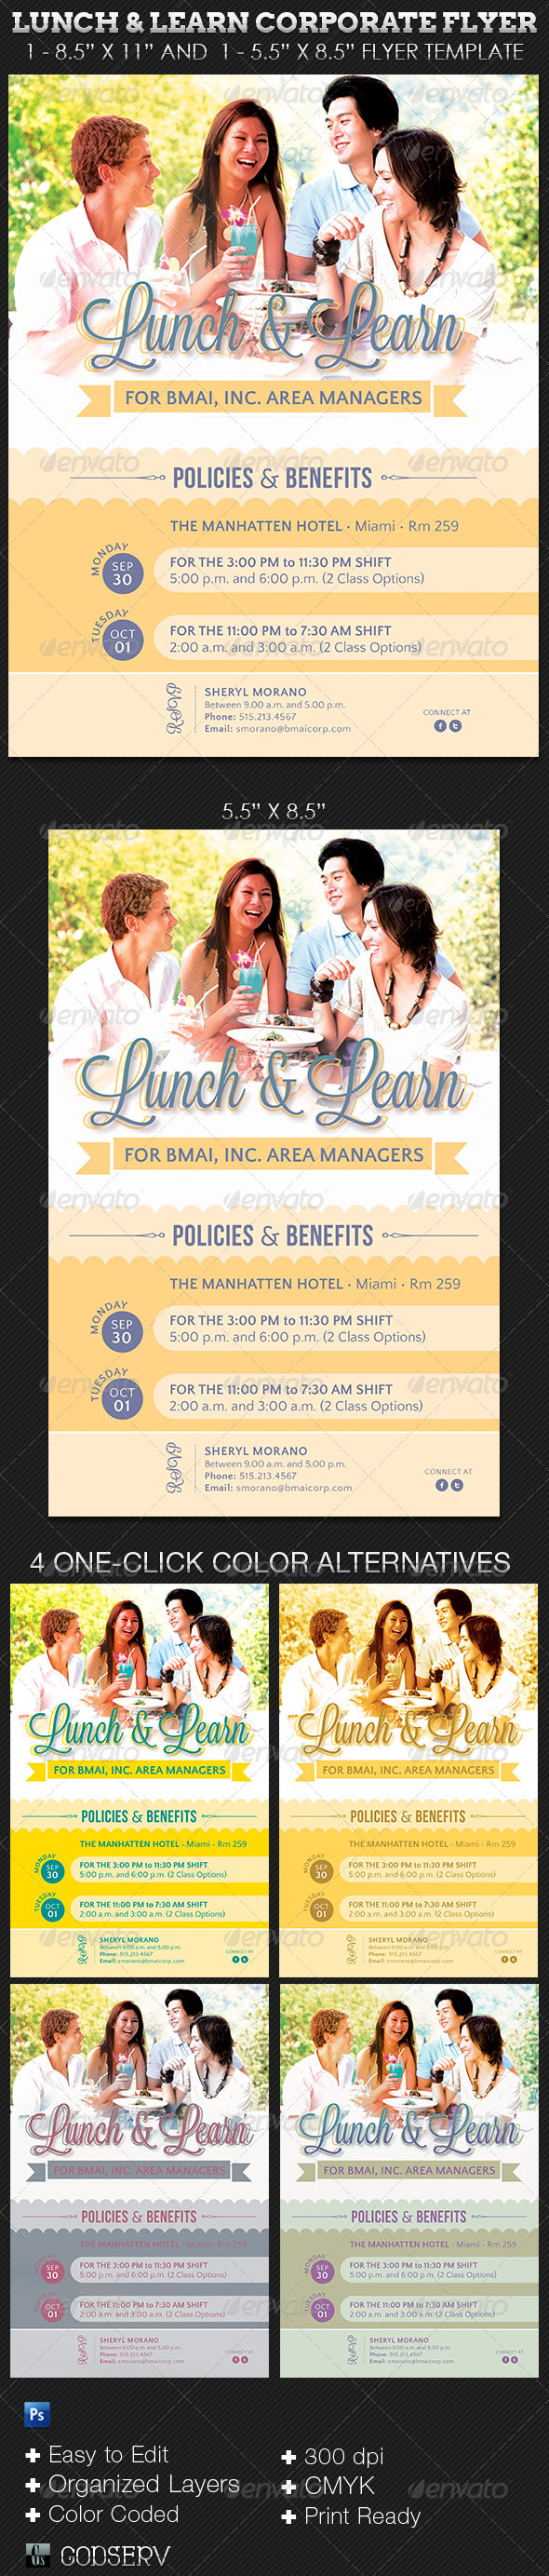 Lunch-and-Learn-Corporate-Flyer-Template-Preview